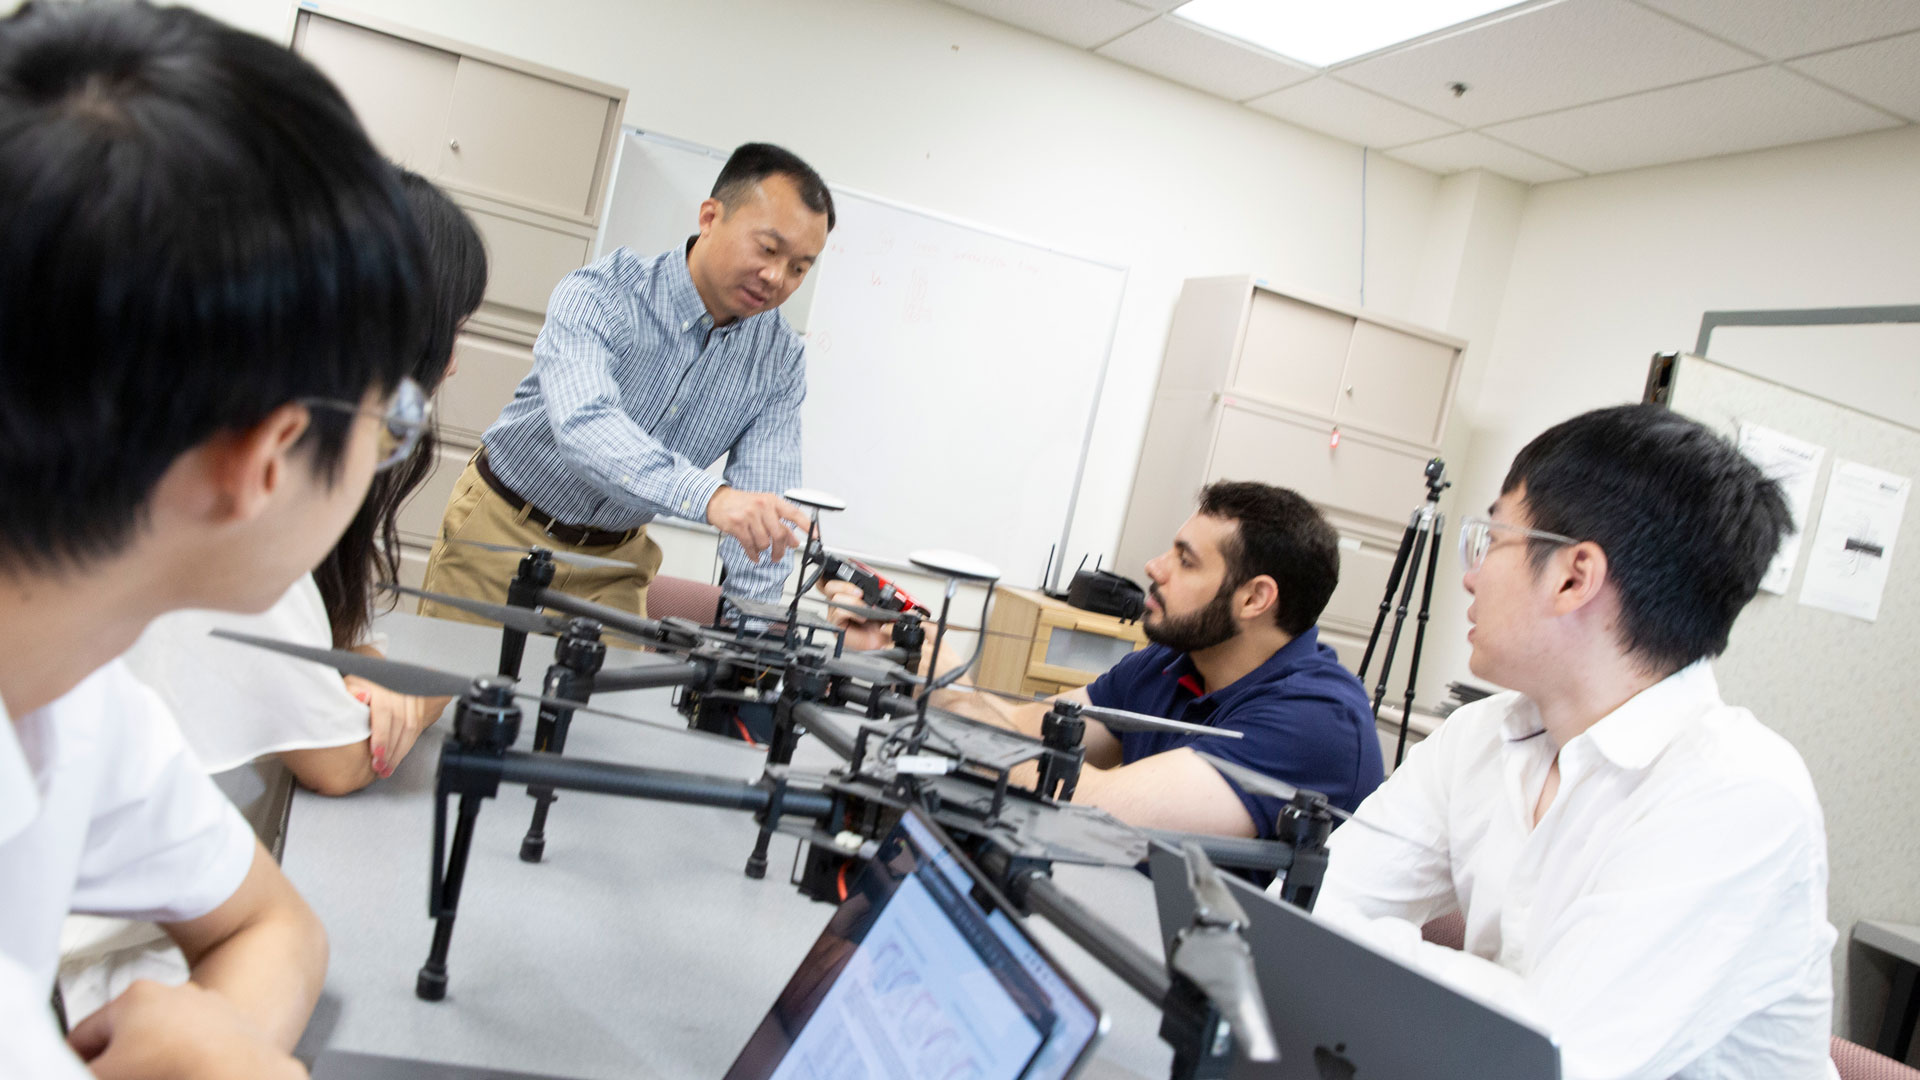 Yanchao Zhang with students and drones